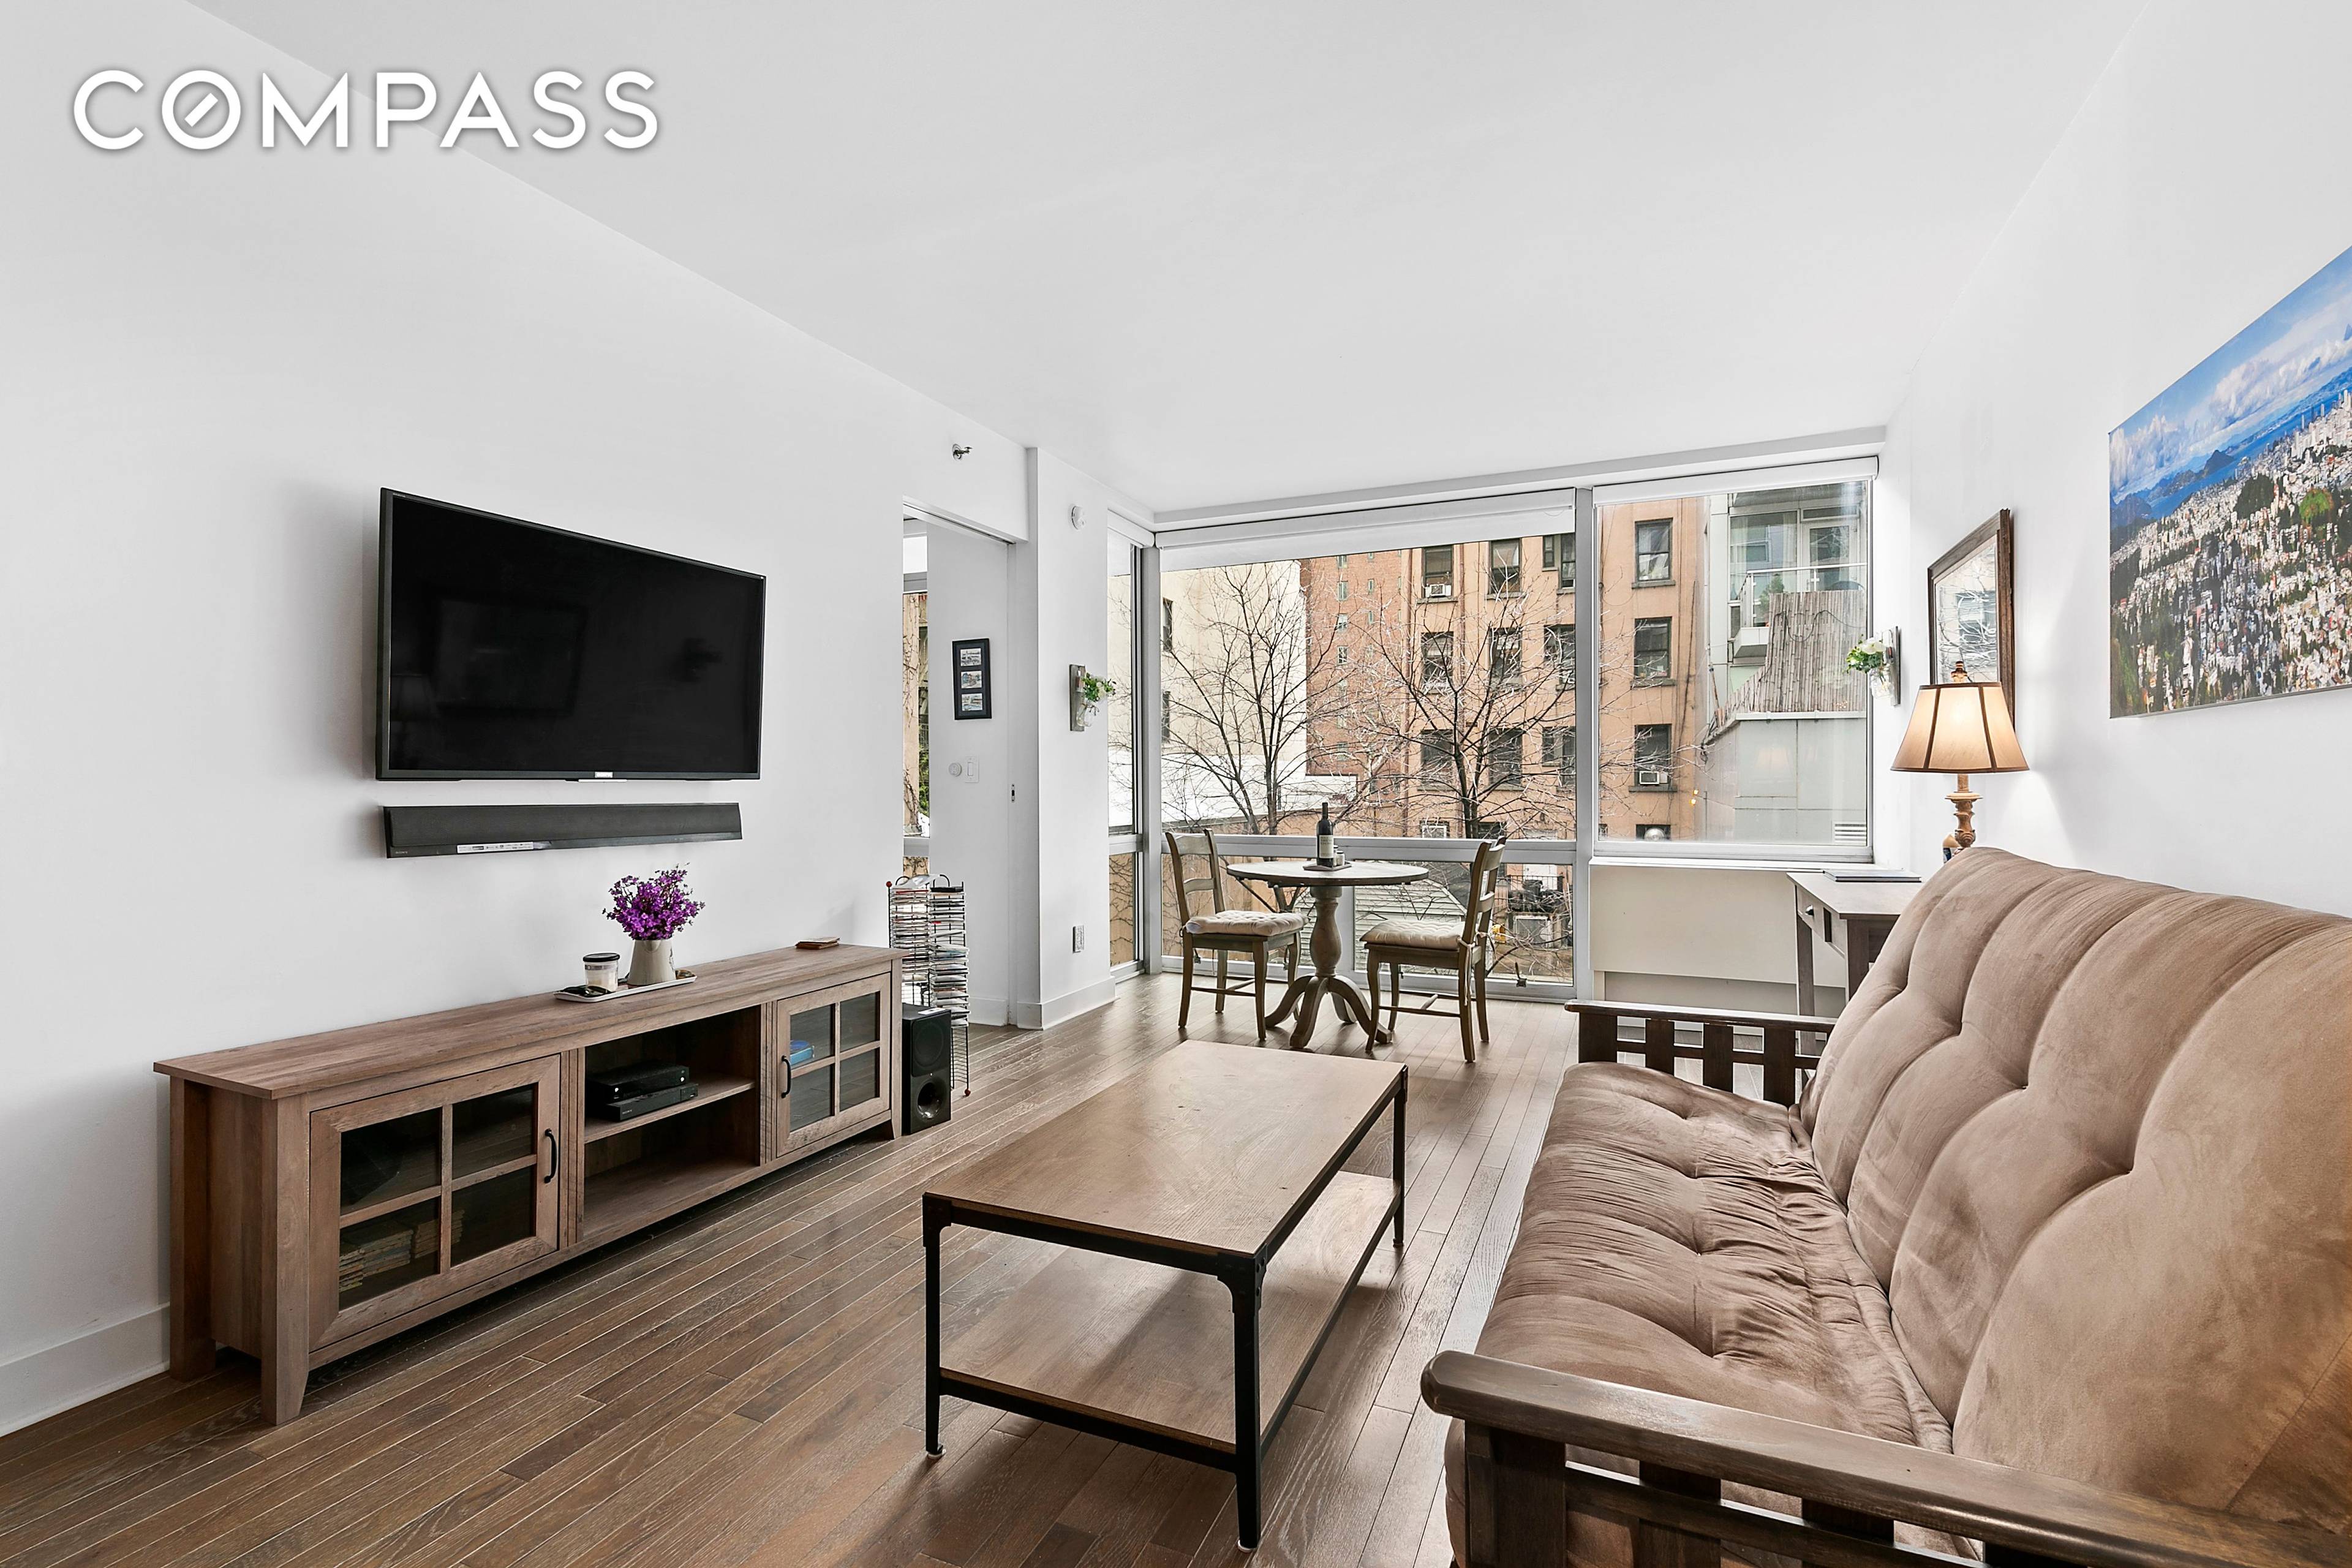 Located in the highly desirable East Village neighborhood, this newly renovated, flexible 2 bed 1.